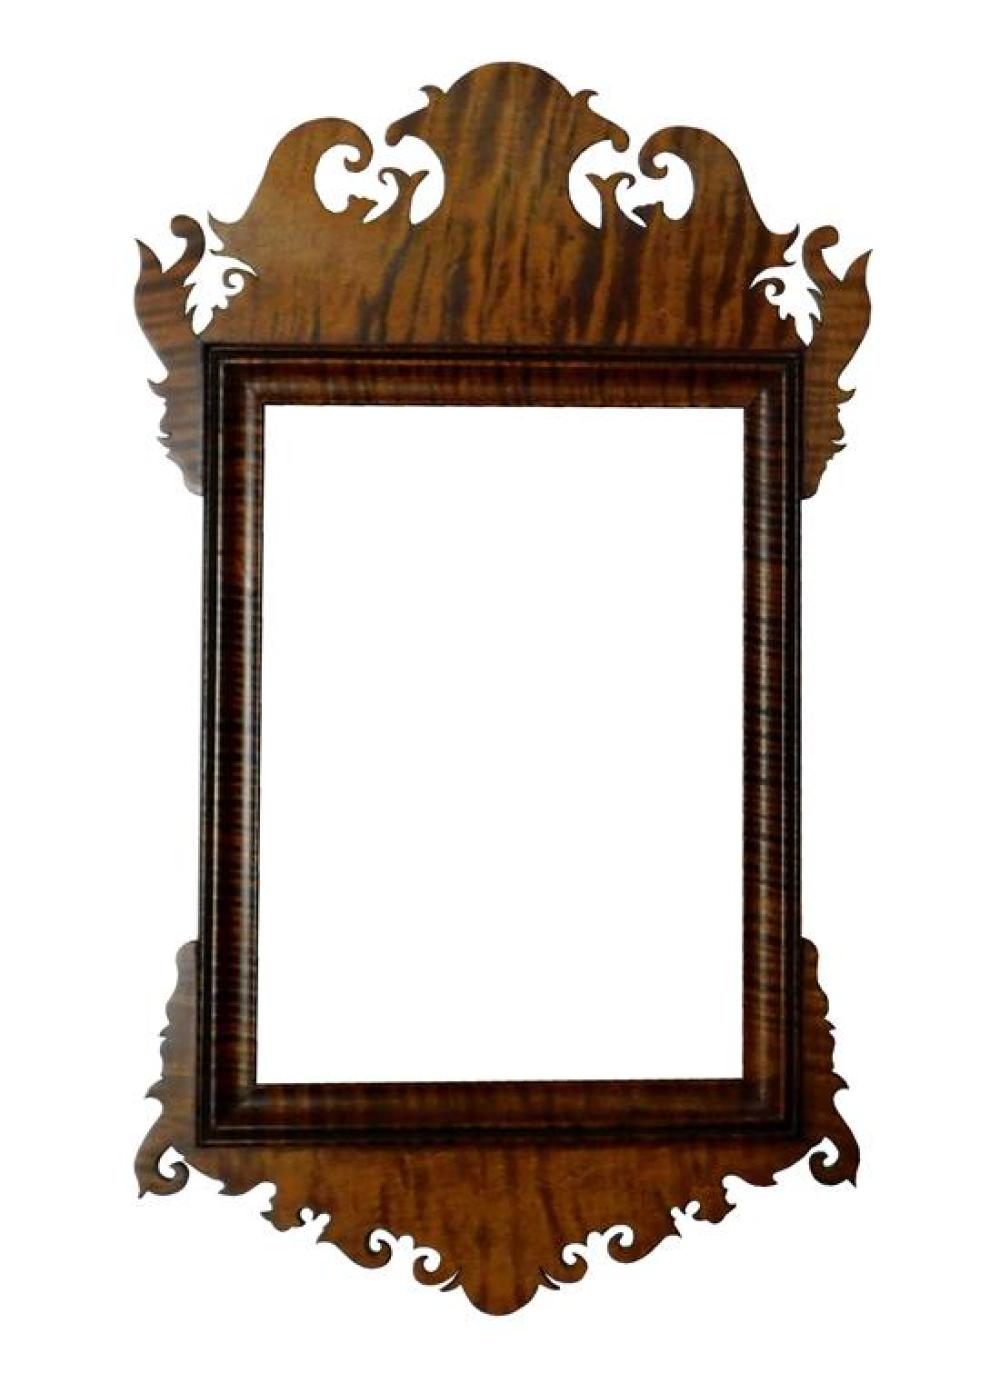 SMALL CHIPPENDALE STYLE WALL MIRROR  31bf2e